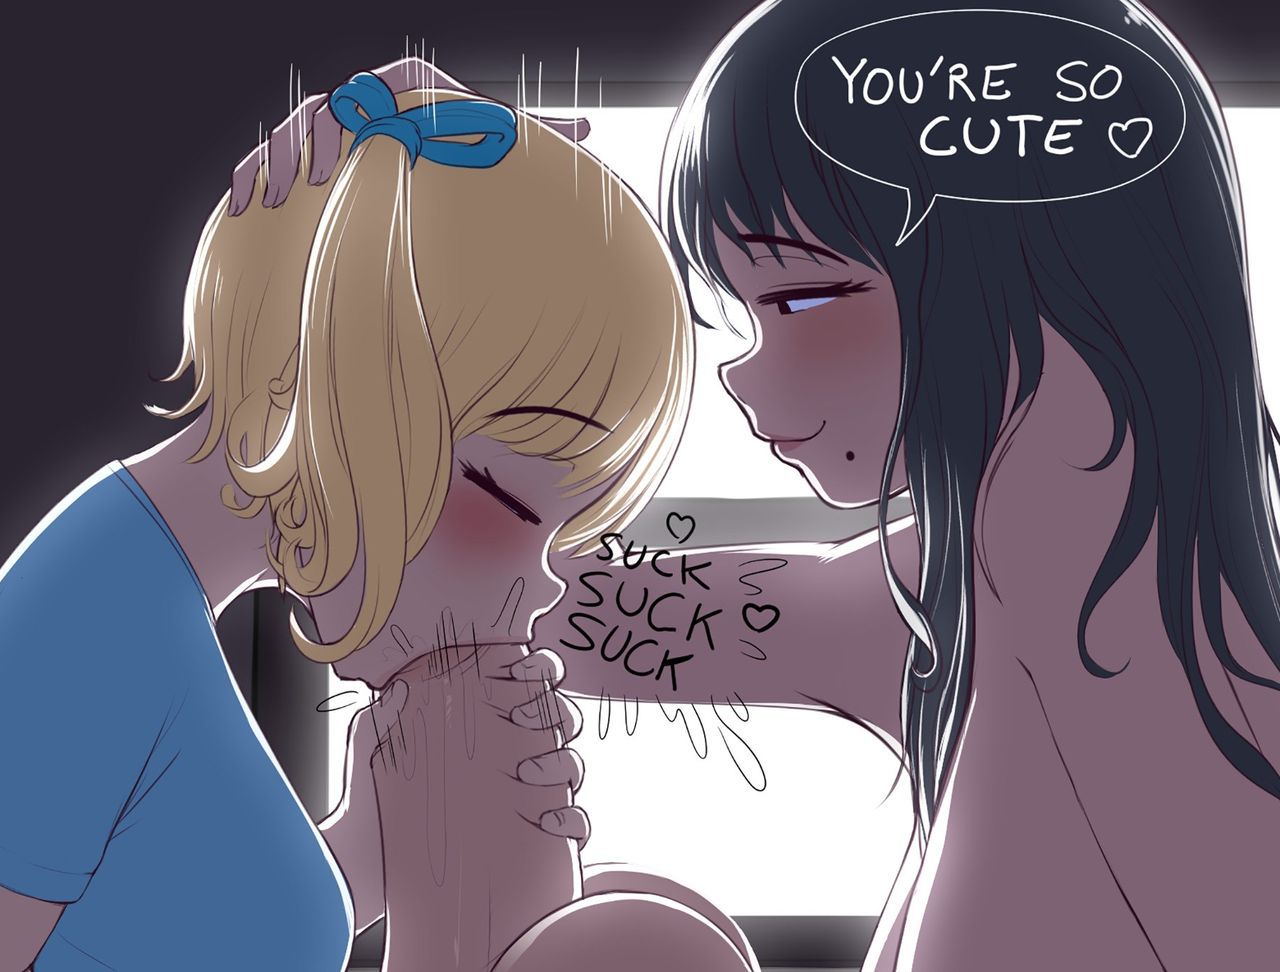 [Lewdua] Love is Sharing - Nessie and Alison 12